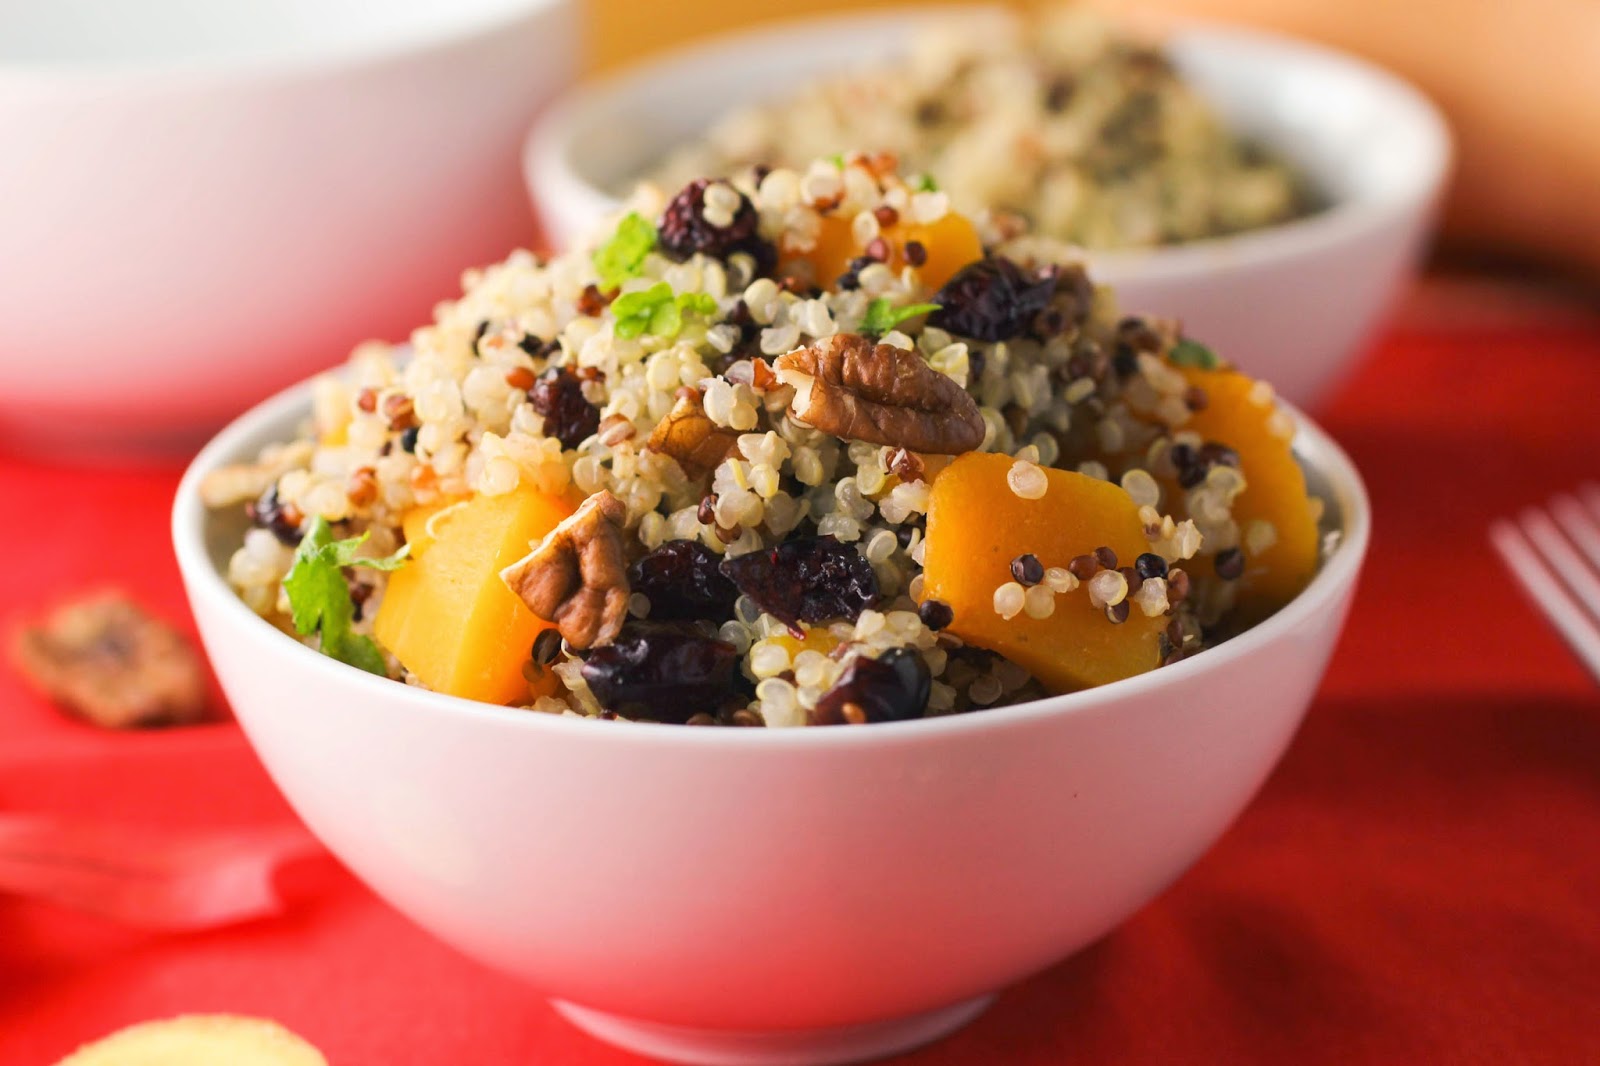 Will Powell: Roasted Butternut Squash and Quinoa Salad